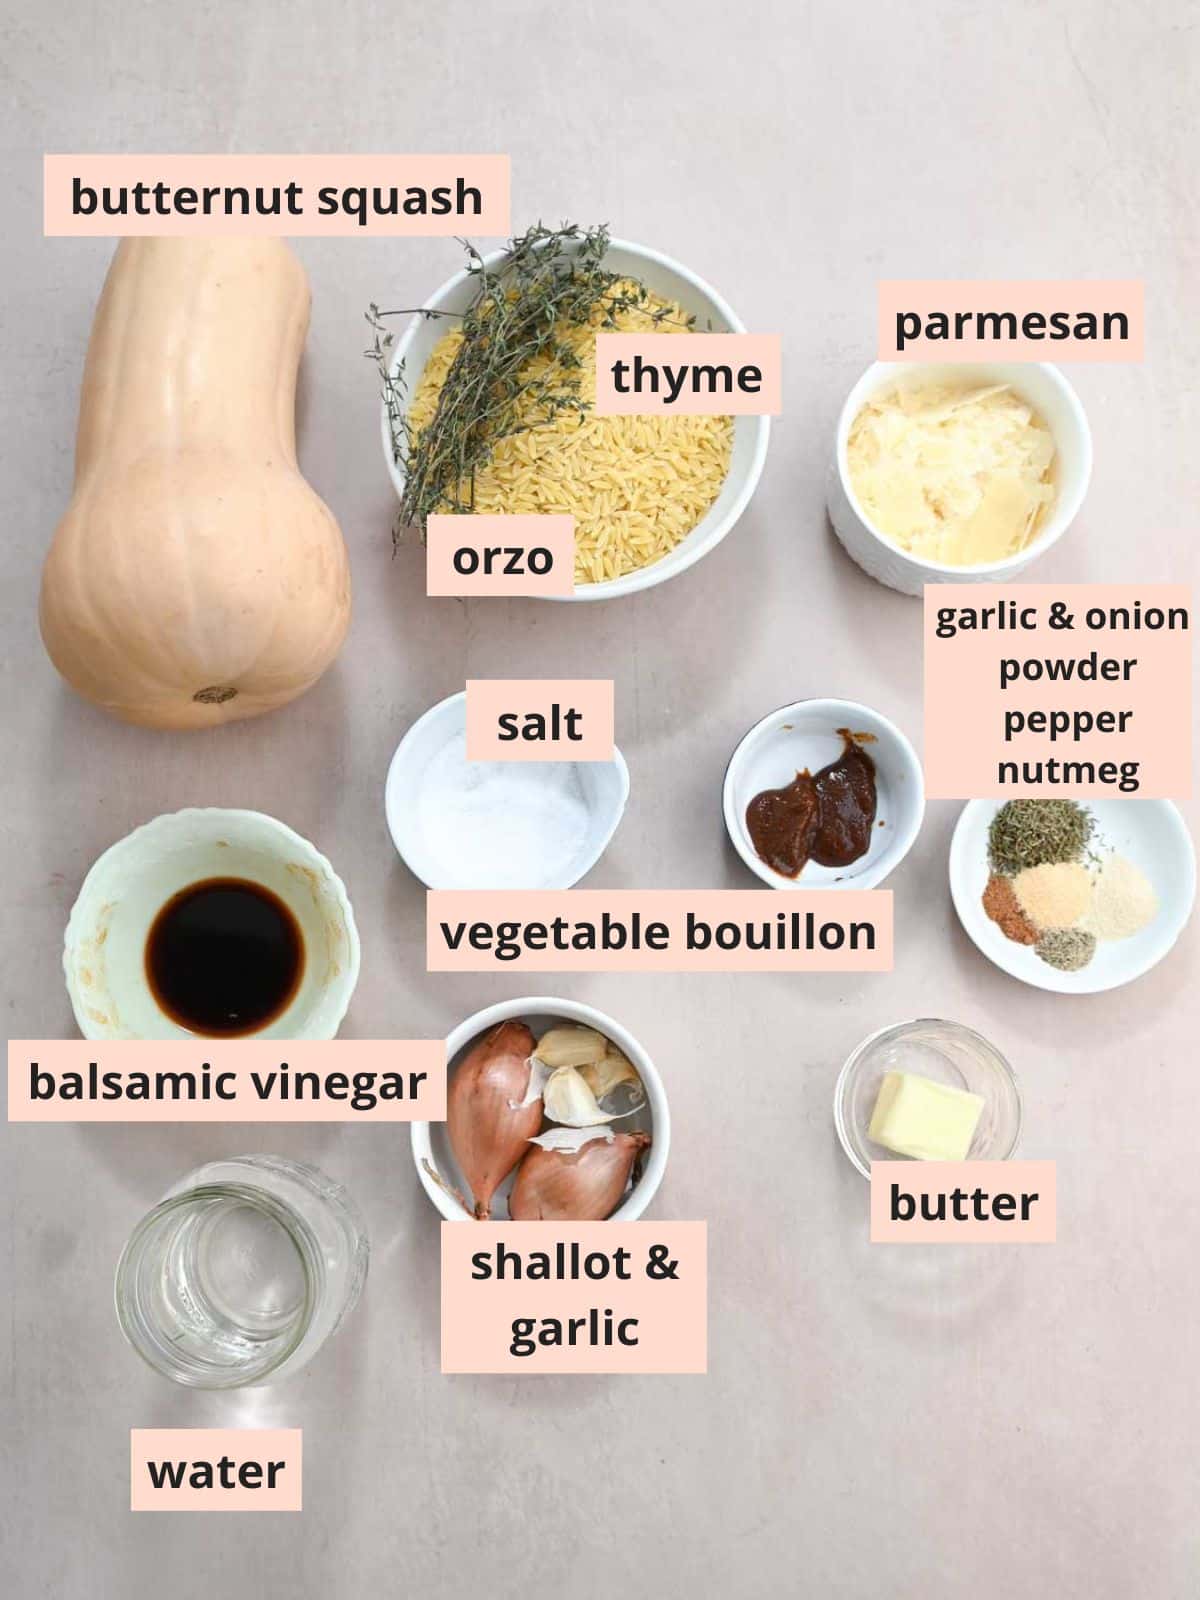 Labeled ingredients used to make butternut squash orzo.